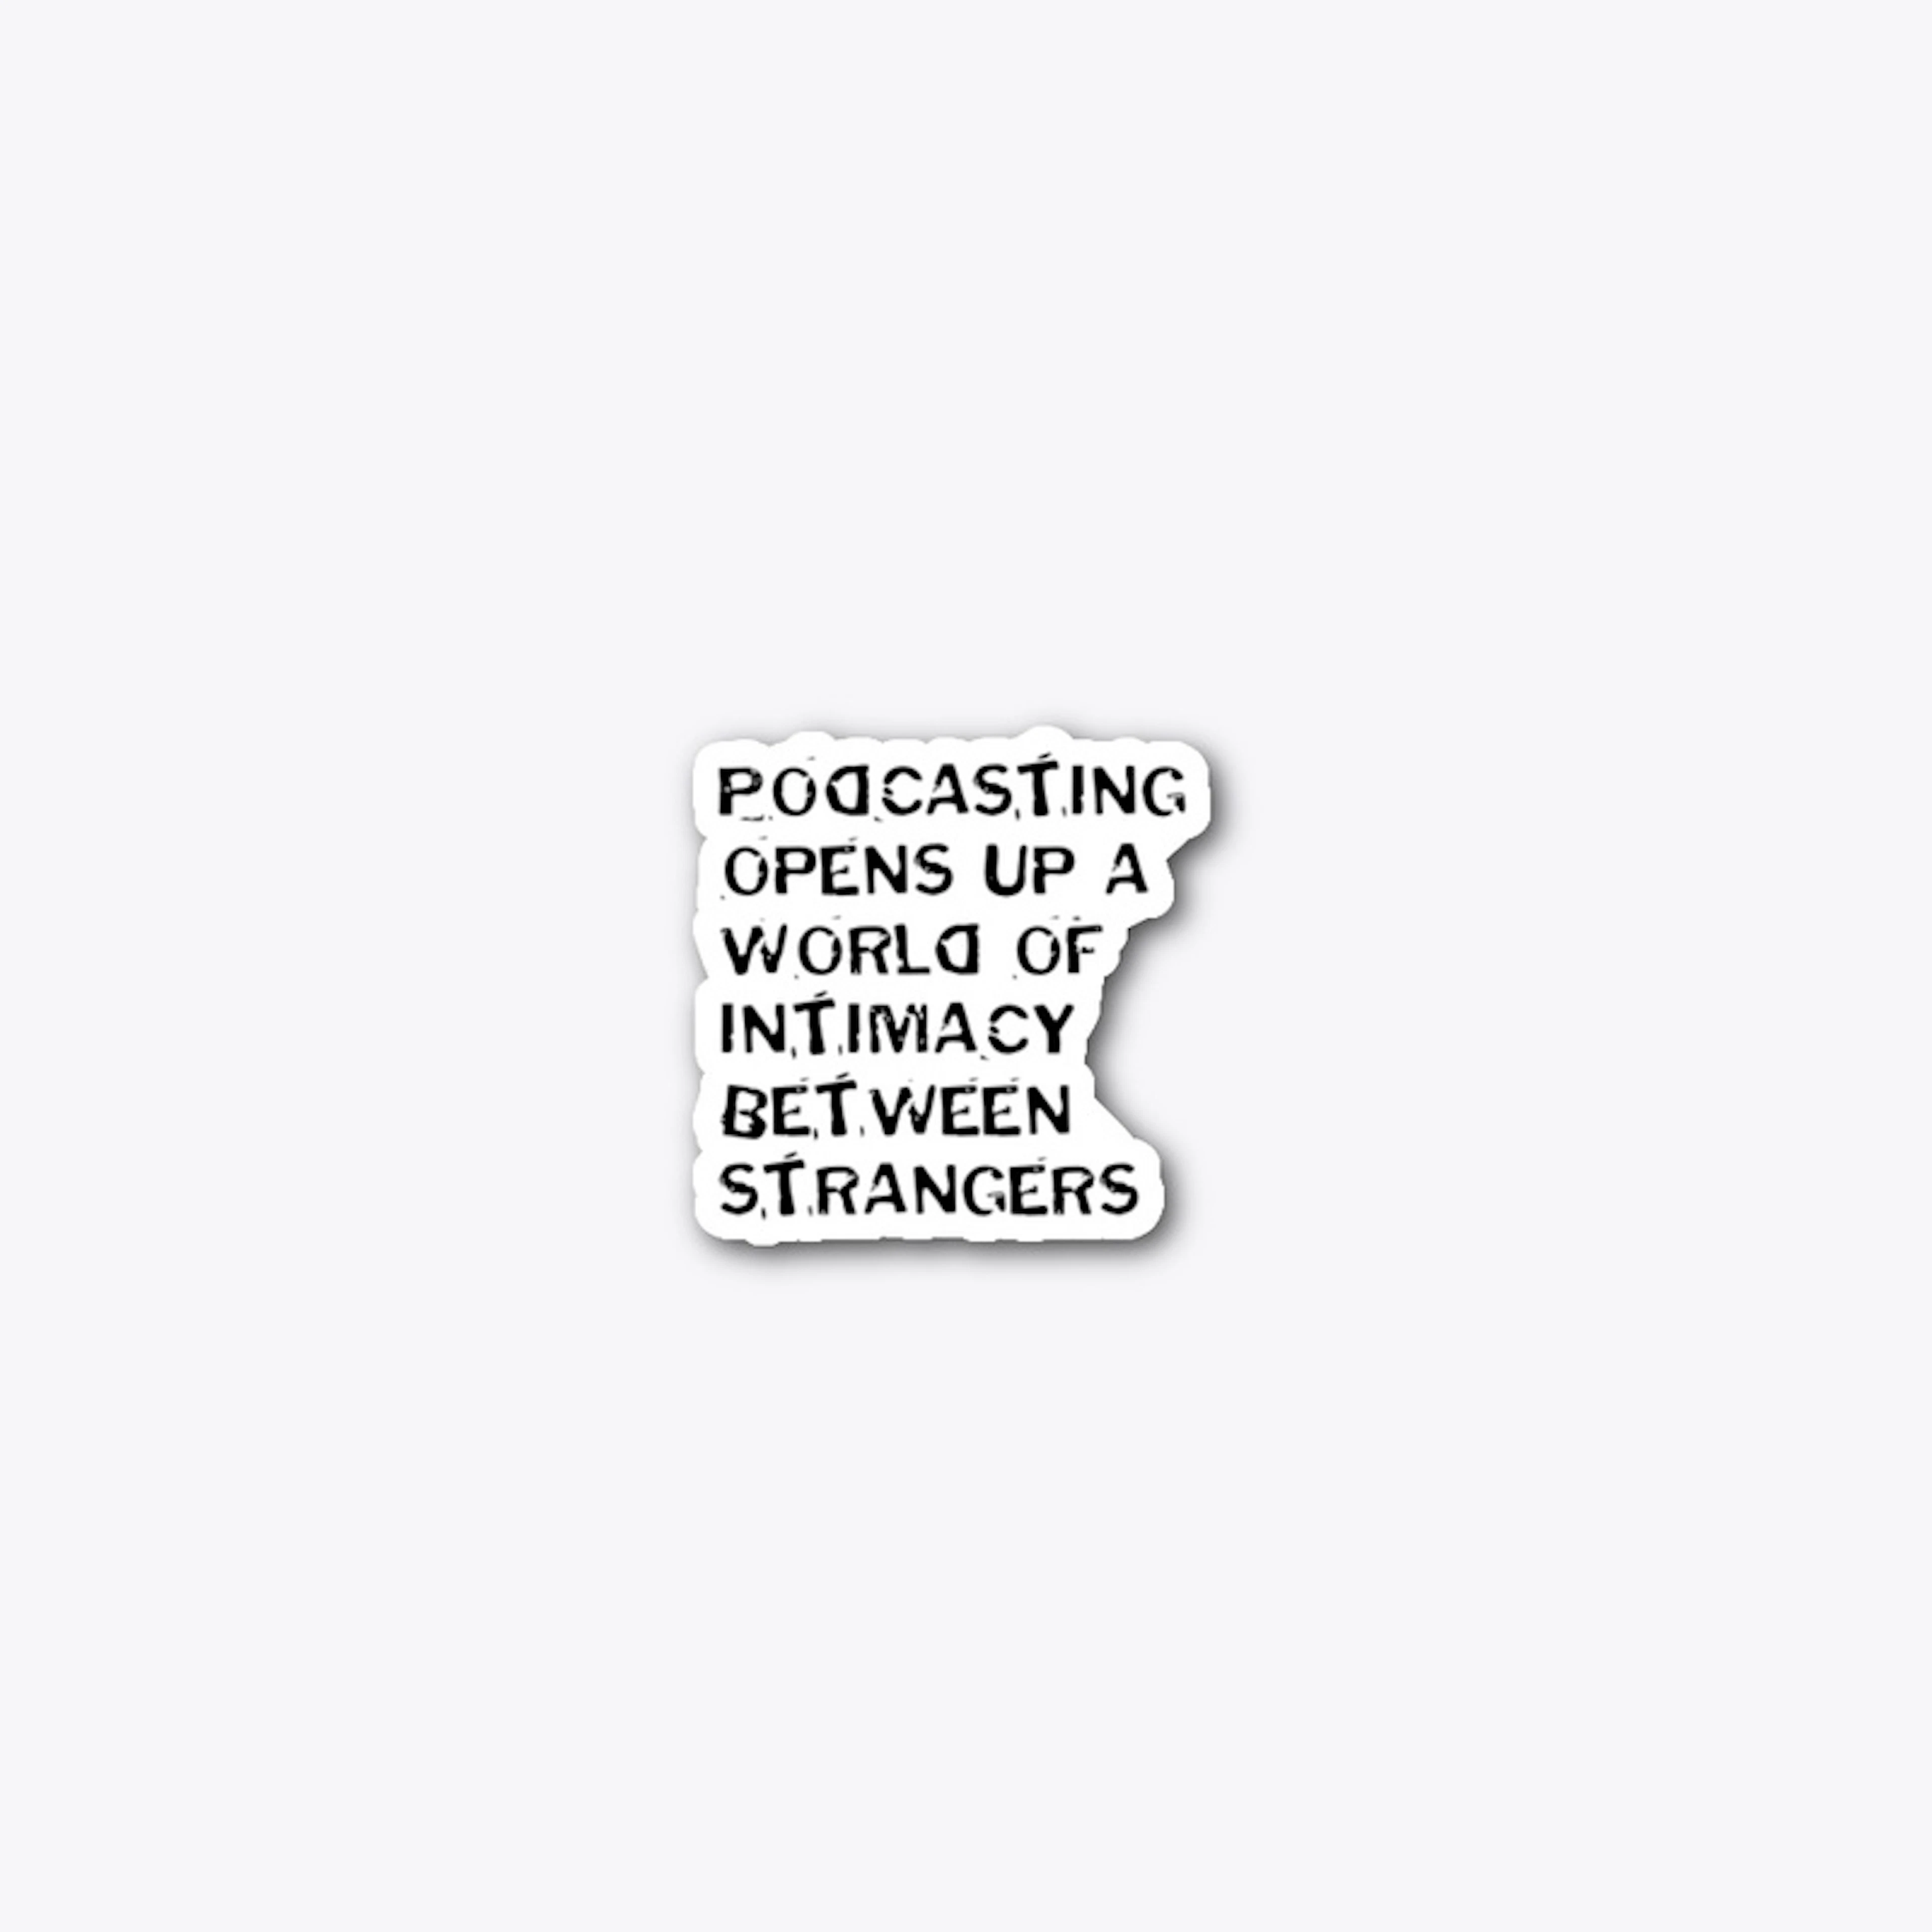 Podcasting and Intimacy